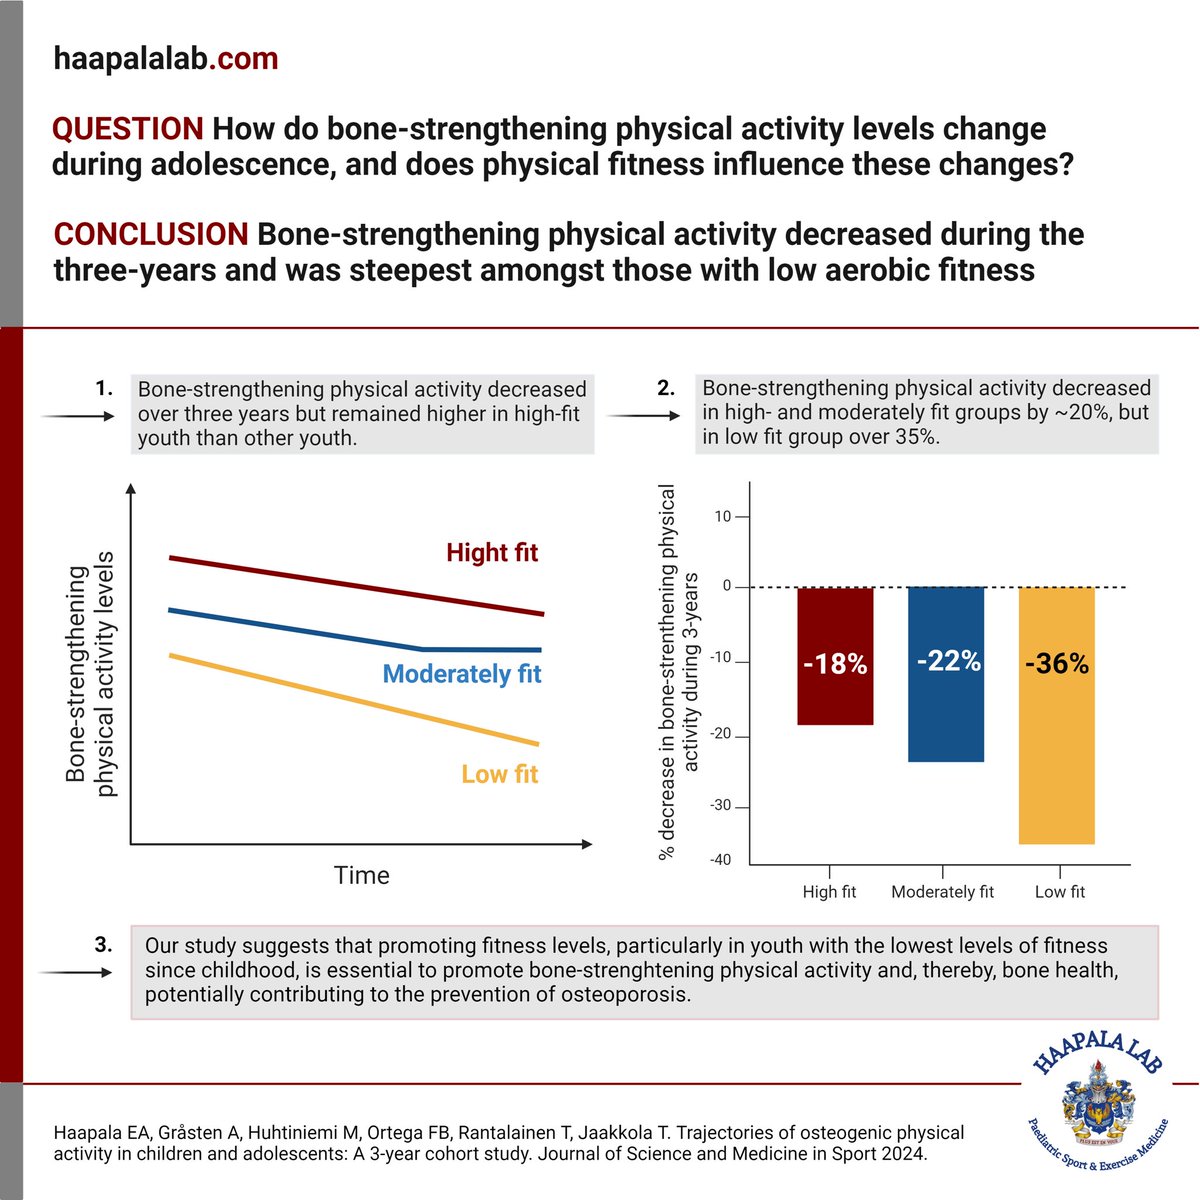 Adolescents with the lowest fitness and motor skill levels accumulate less bone-strengthening physical activity than others. The decline of such activity is also steepest in low fit youth. #osteoporosis #physicalactivity @ortegaporcel jsams.org/article/S1440-…